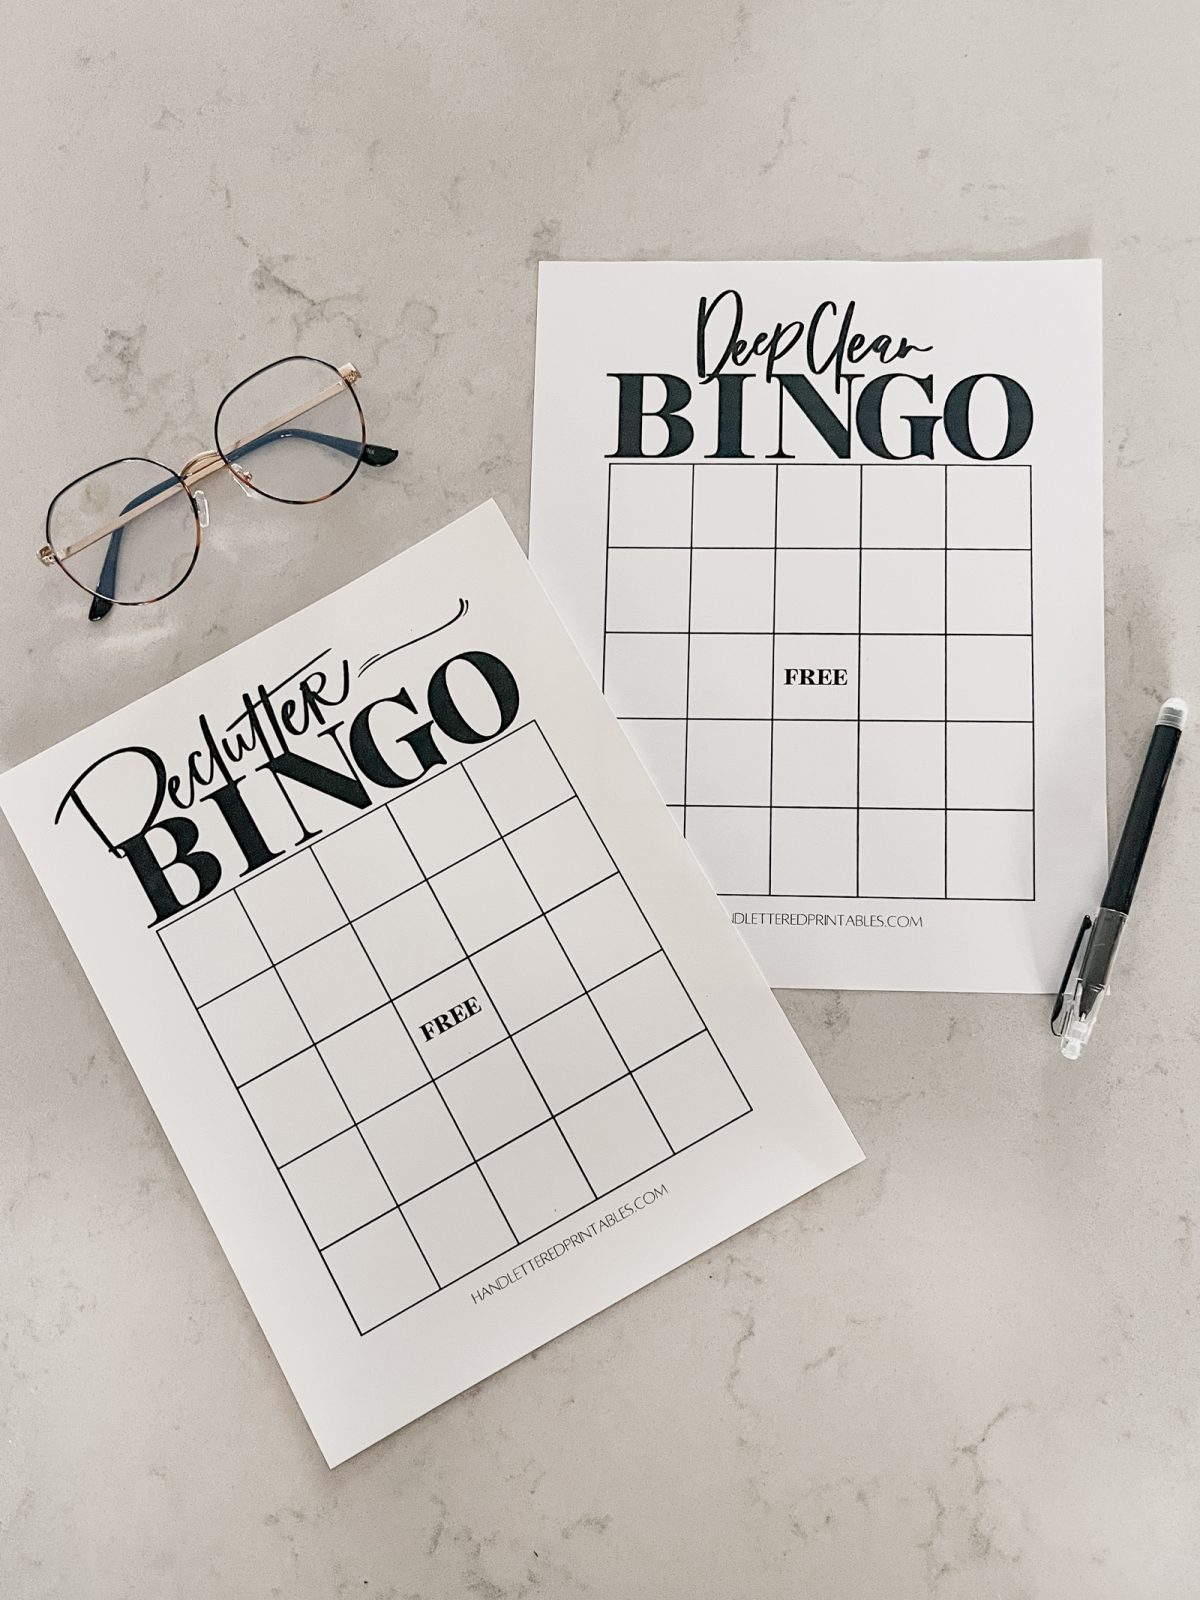 Deep clean bingo and declutter bingo printed on countertop with pen and glasses